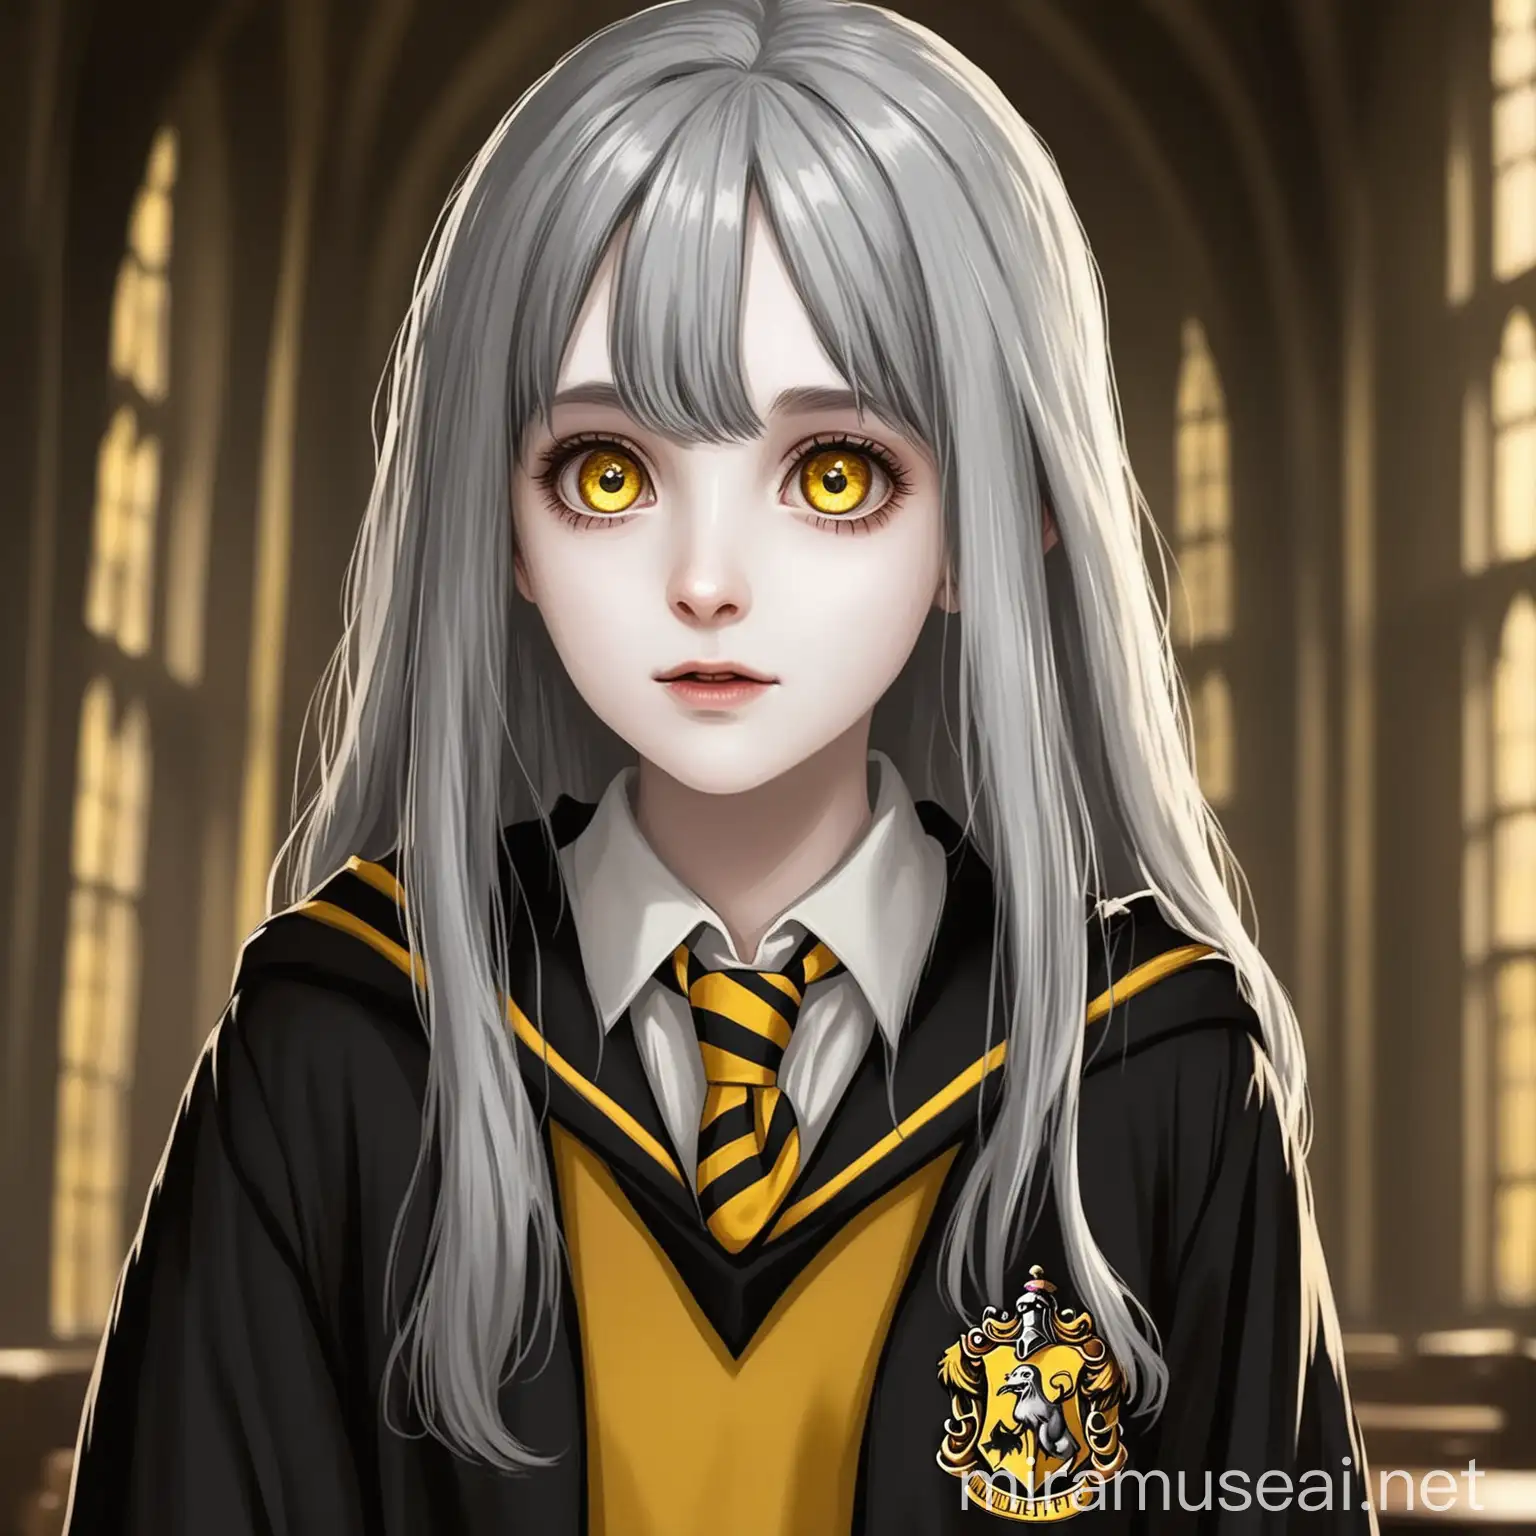 Hufflepuff Student with Unique Features in Hogwarts Uniform